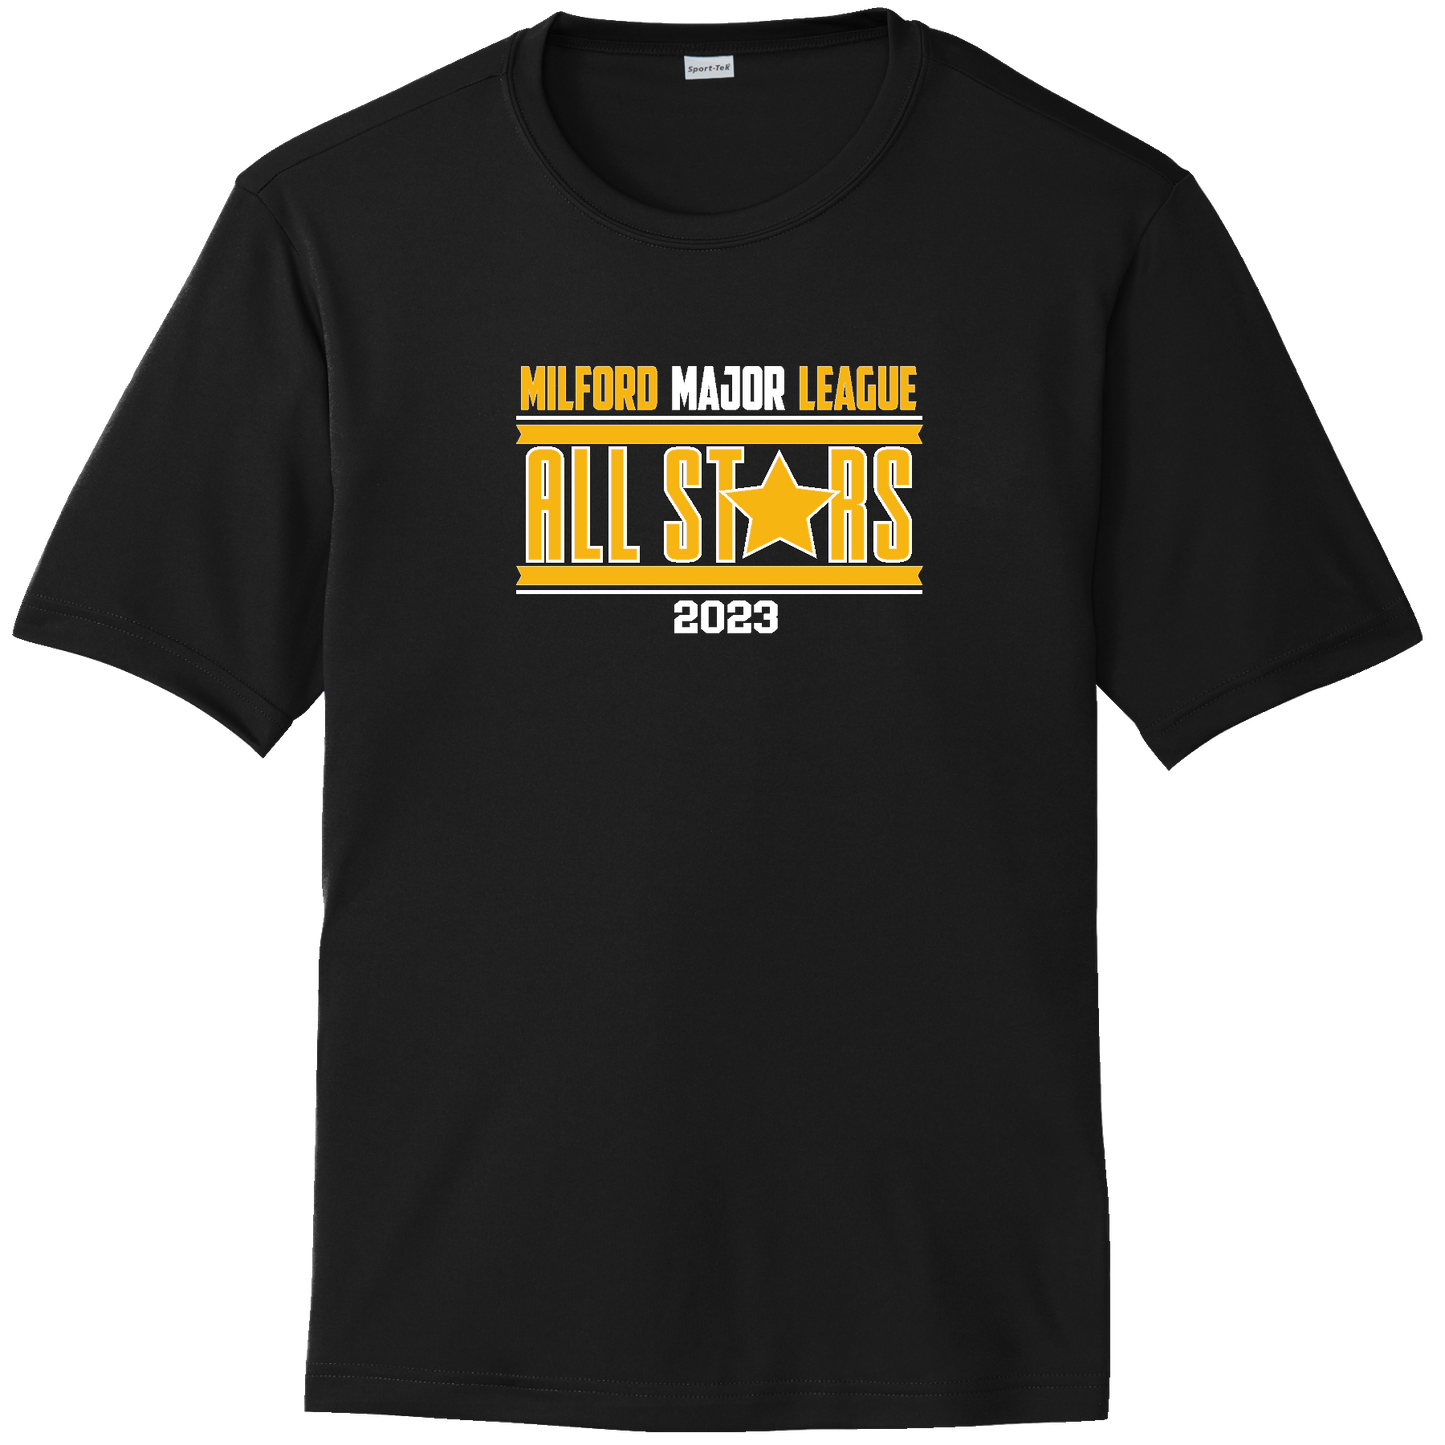 Sport-Tek Youth PosiCharge Competitor Tee (MILFORD MAJOR)